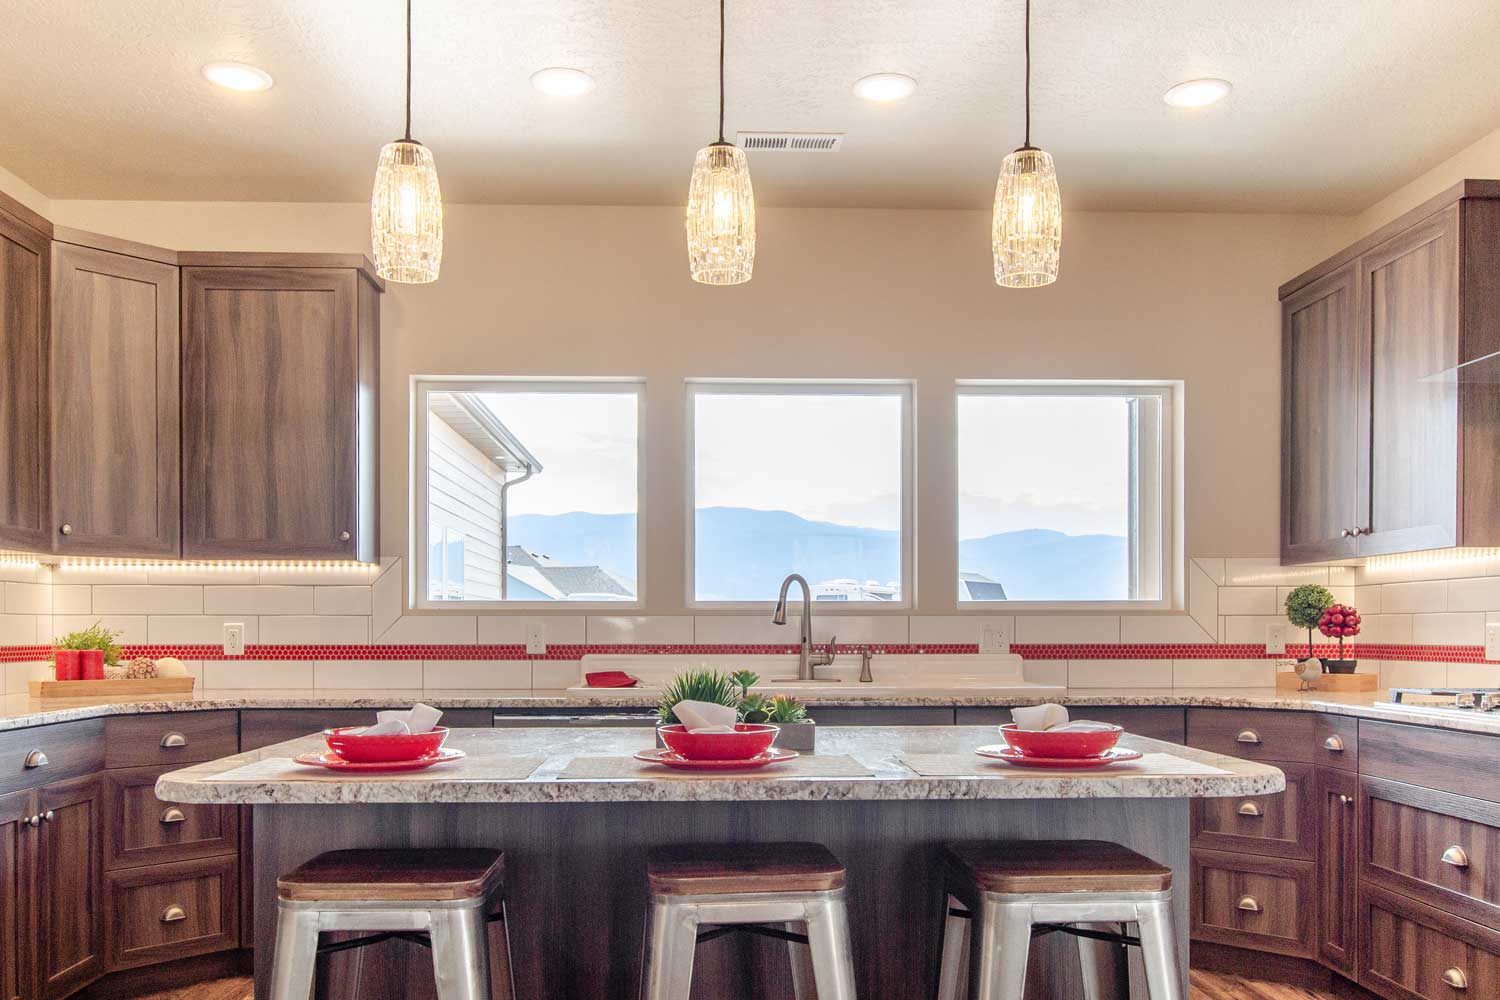 kitchen area showing tile backspace with red accents through the middle, three windows above the sink, drop ceiling lighting, three bar stools made of silver metal and wood tops